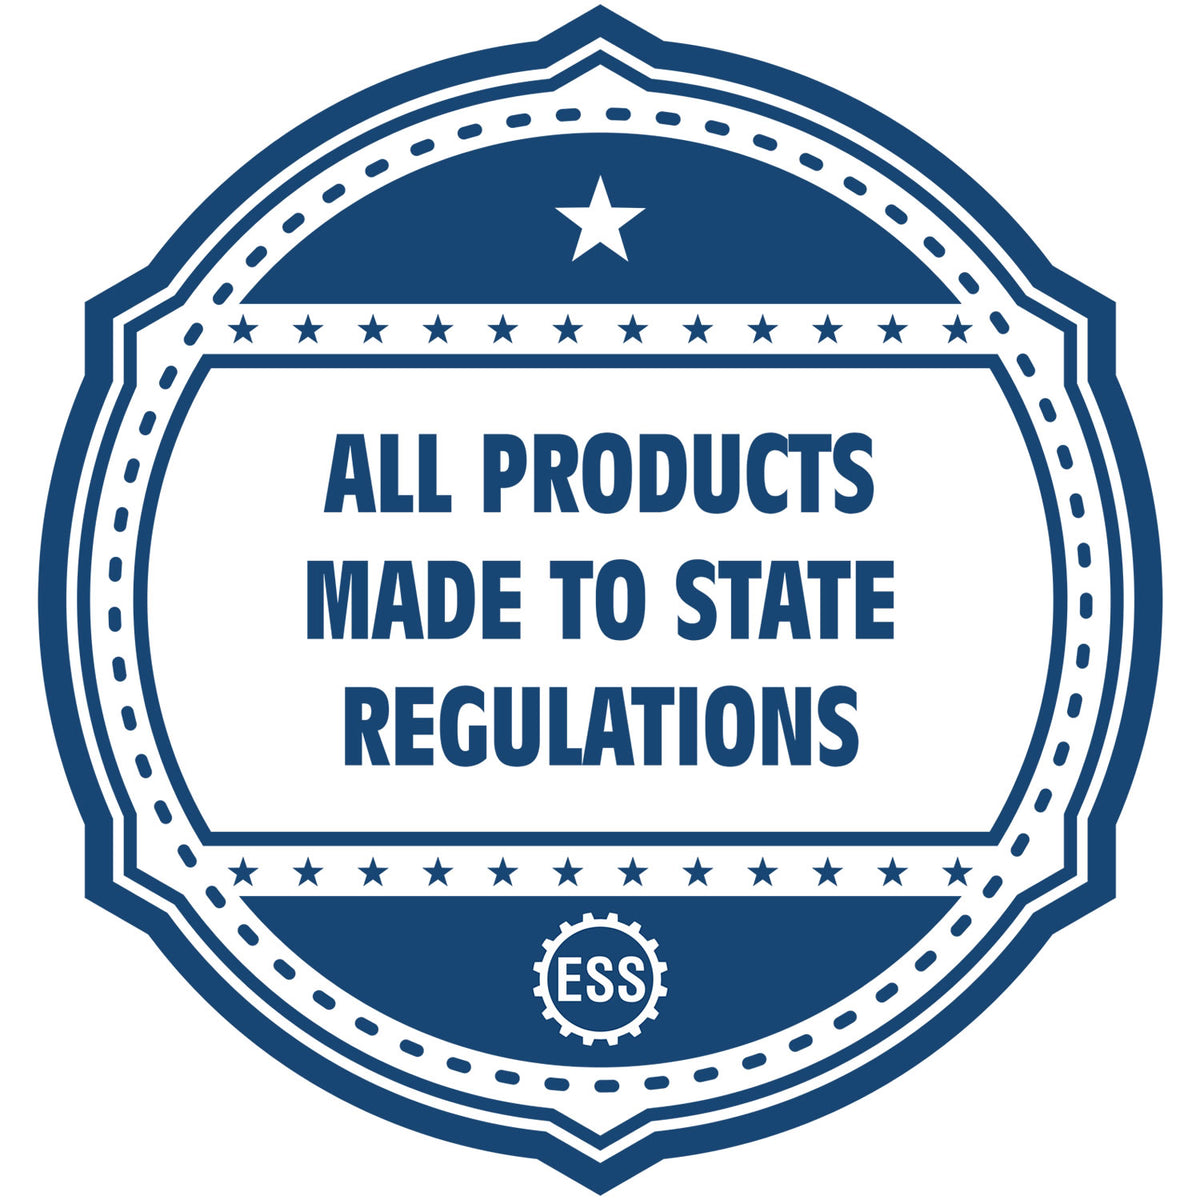 An icon or badge element for the Arizona Landscape Architectural Seal Stamp showing that this product is made in compliance with state regulations.